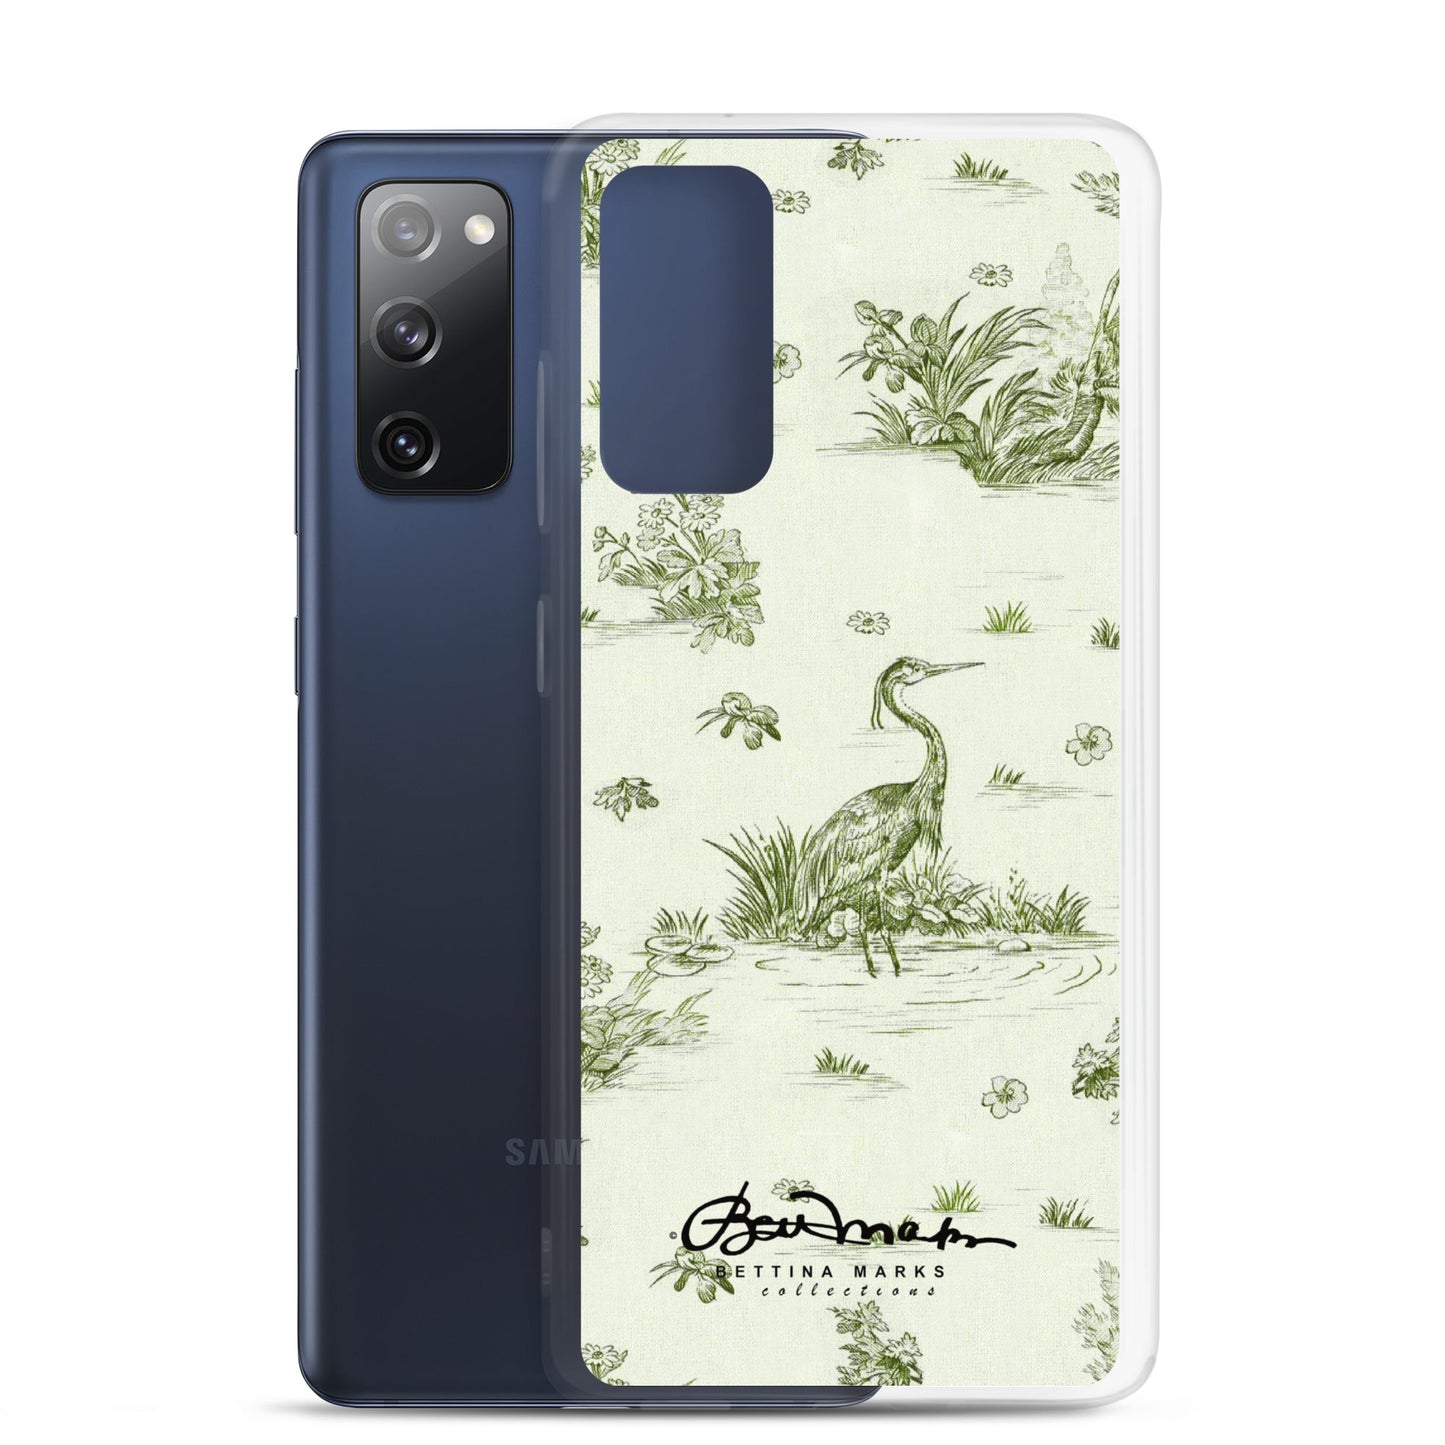 Toiles de Jouy tree Hugging Forest Green Samsung Case (select model)